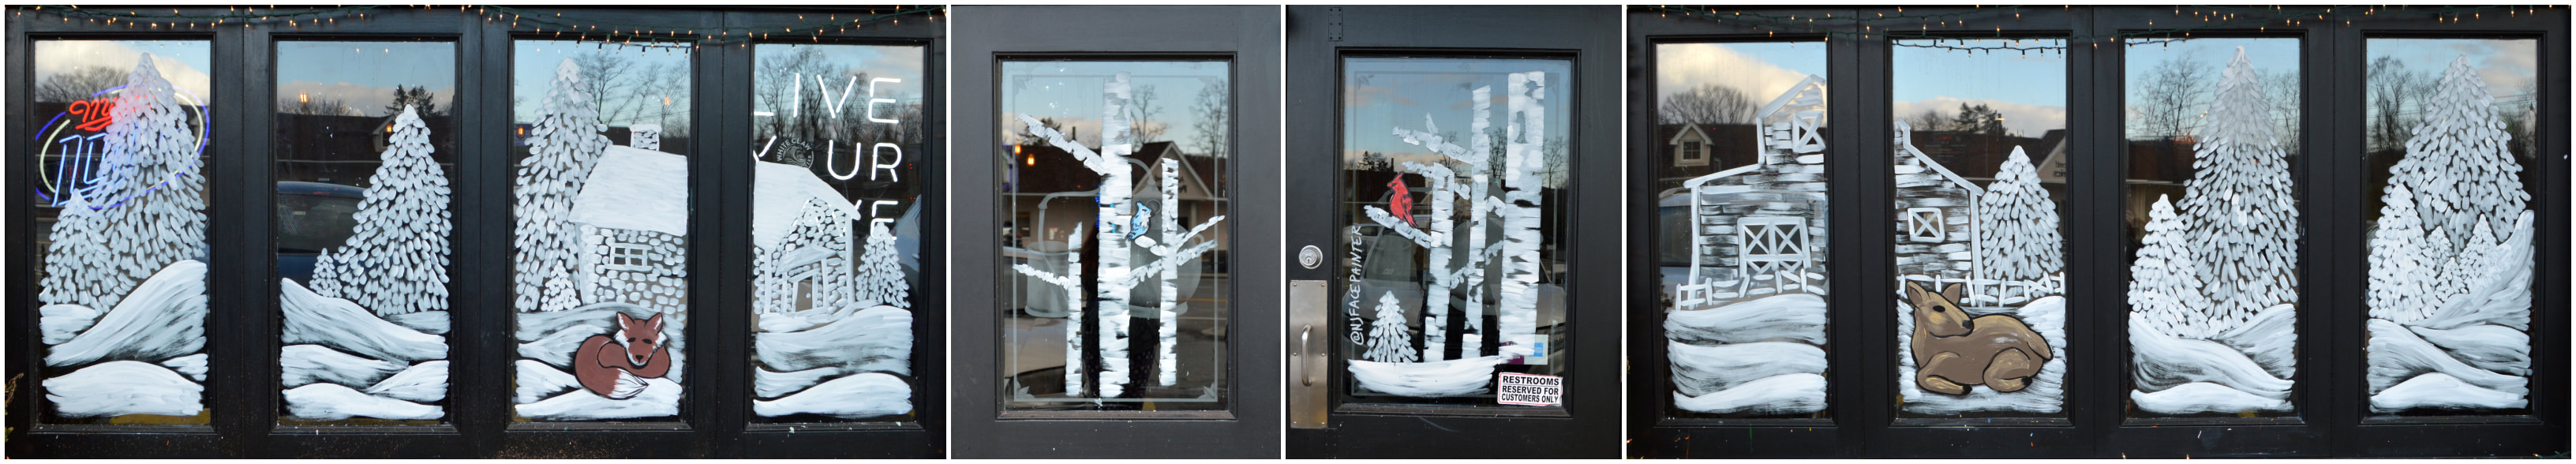 Winter Window Painting at The Copper Still in Pomona, Rockland County, NY